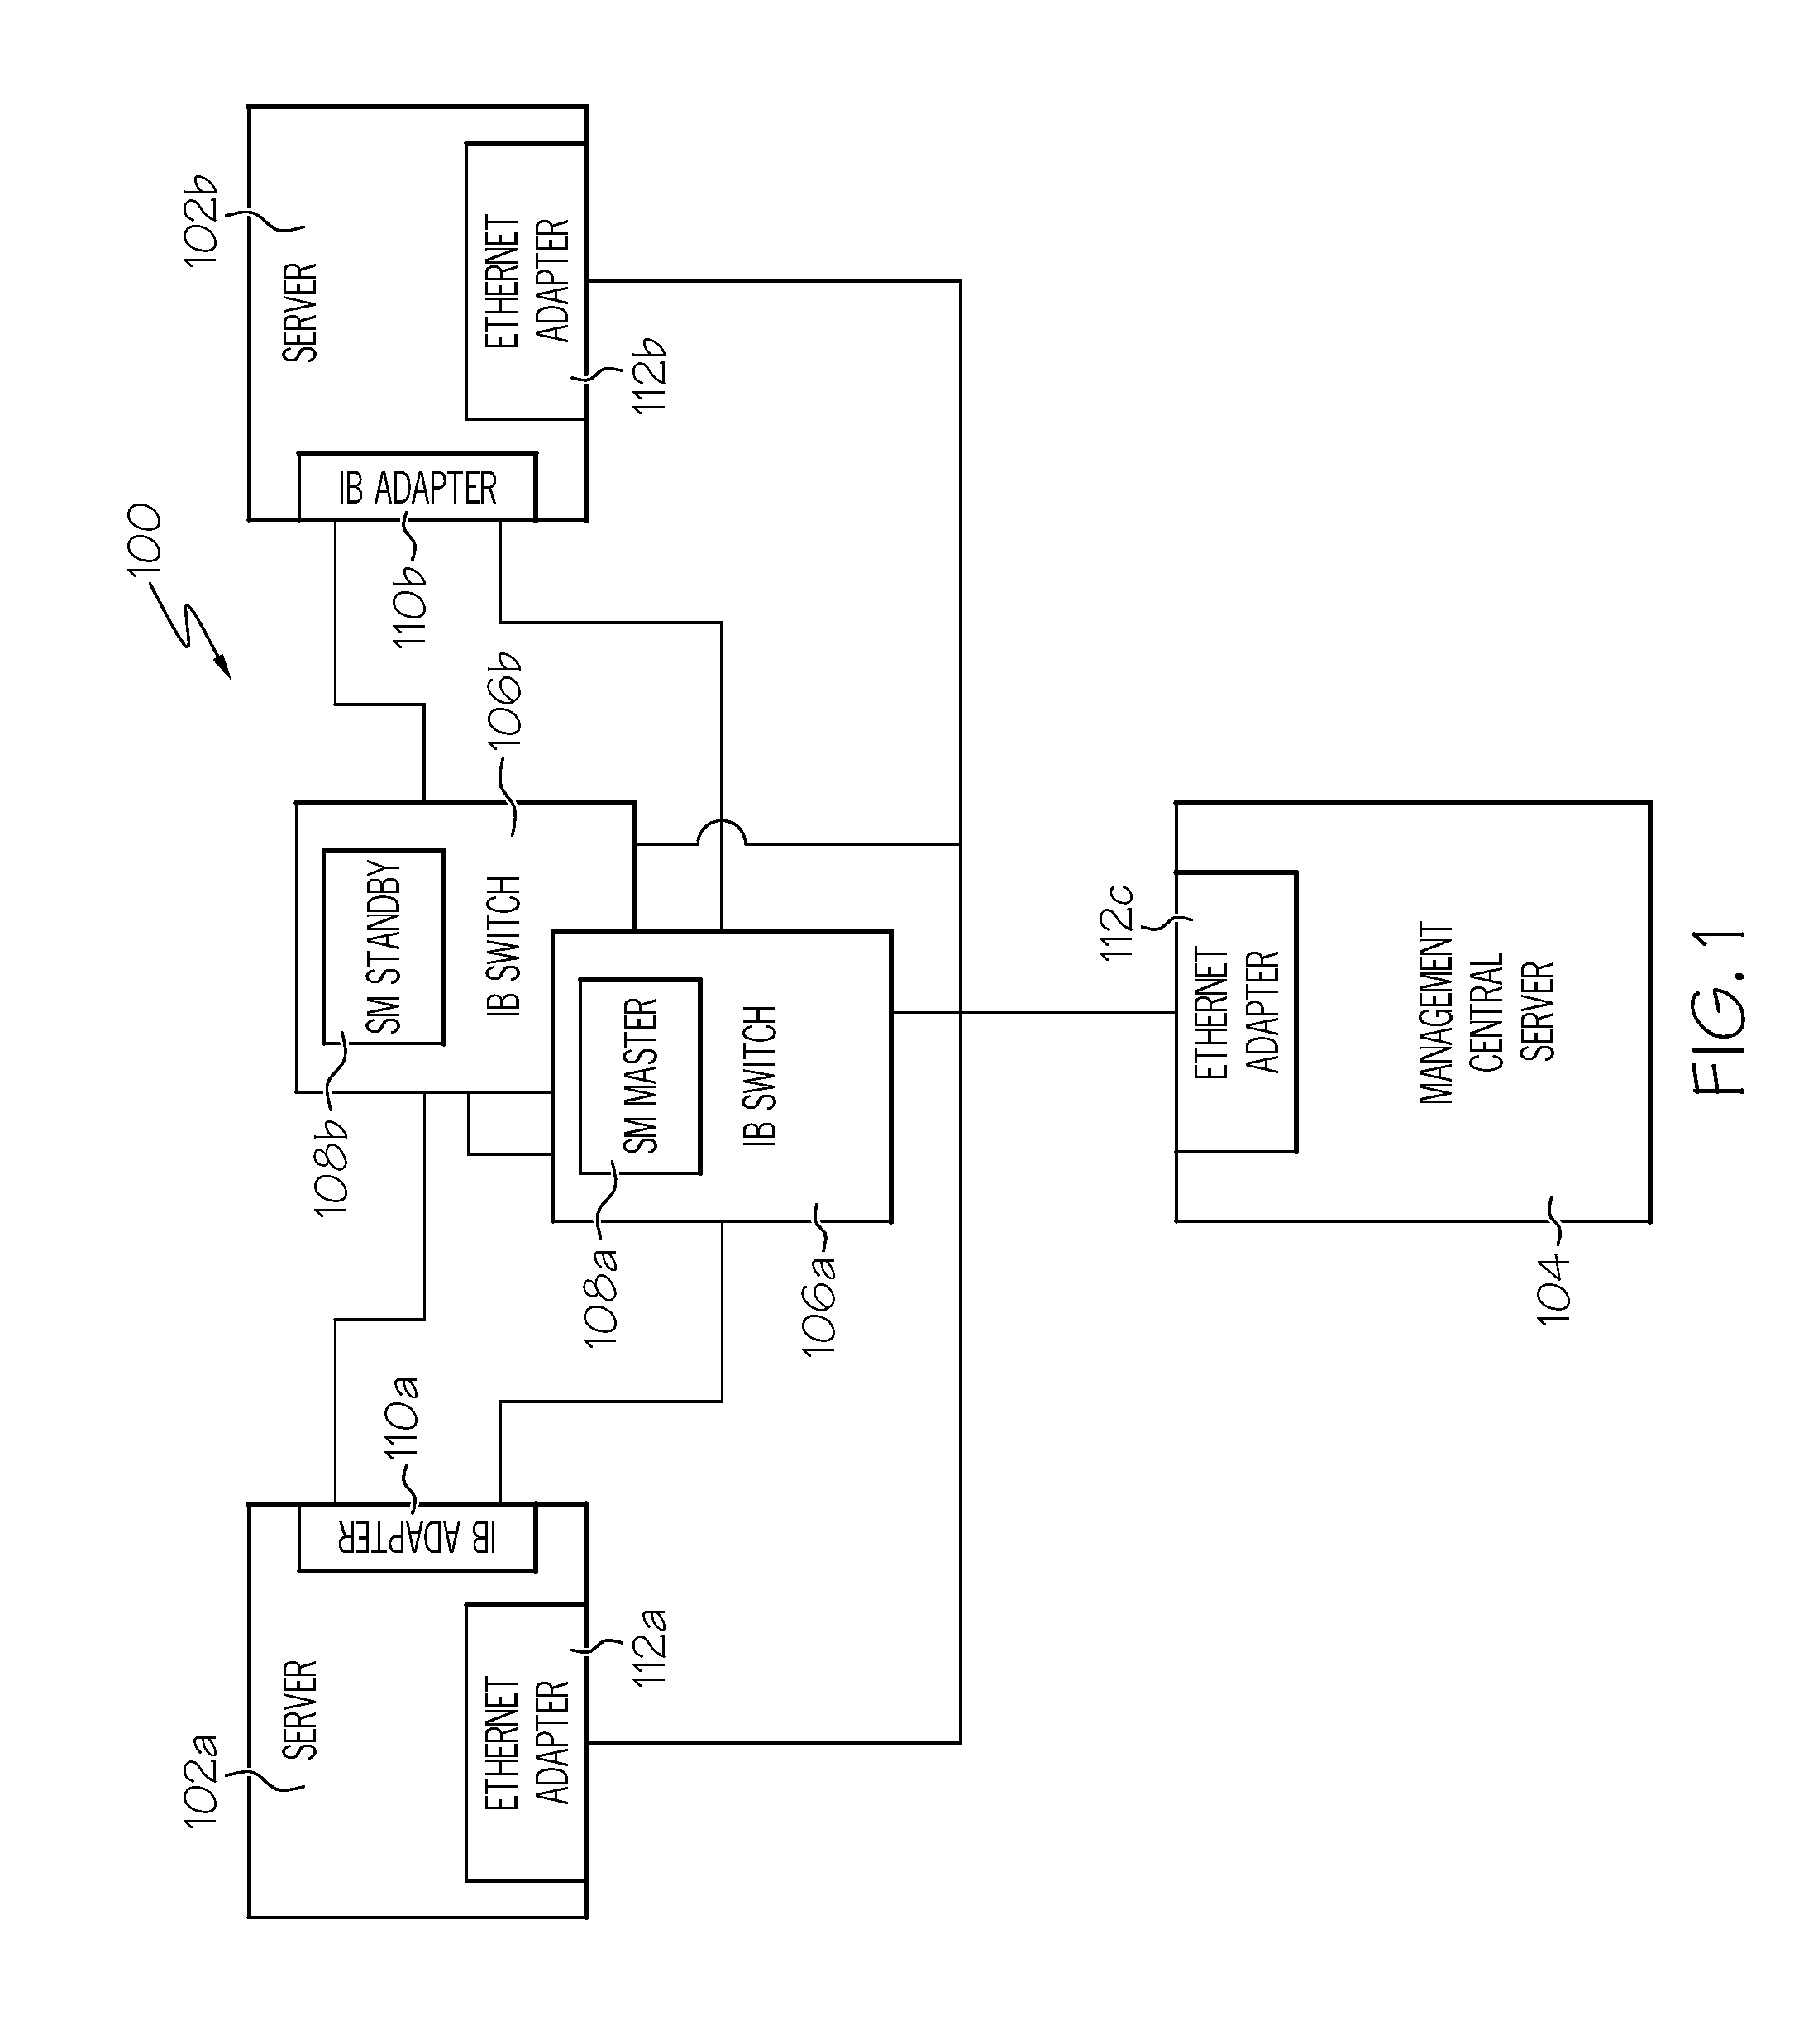 System and method for implementing an infiniband error log analysis model to facilitate faster problem isolation and repair